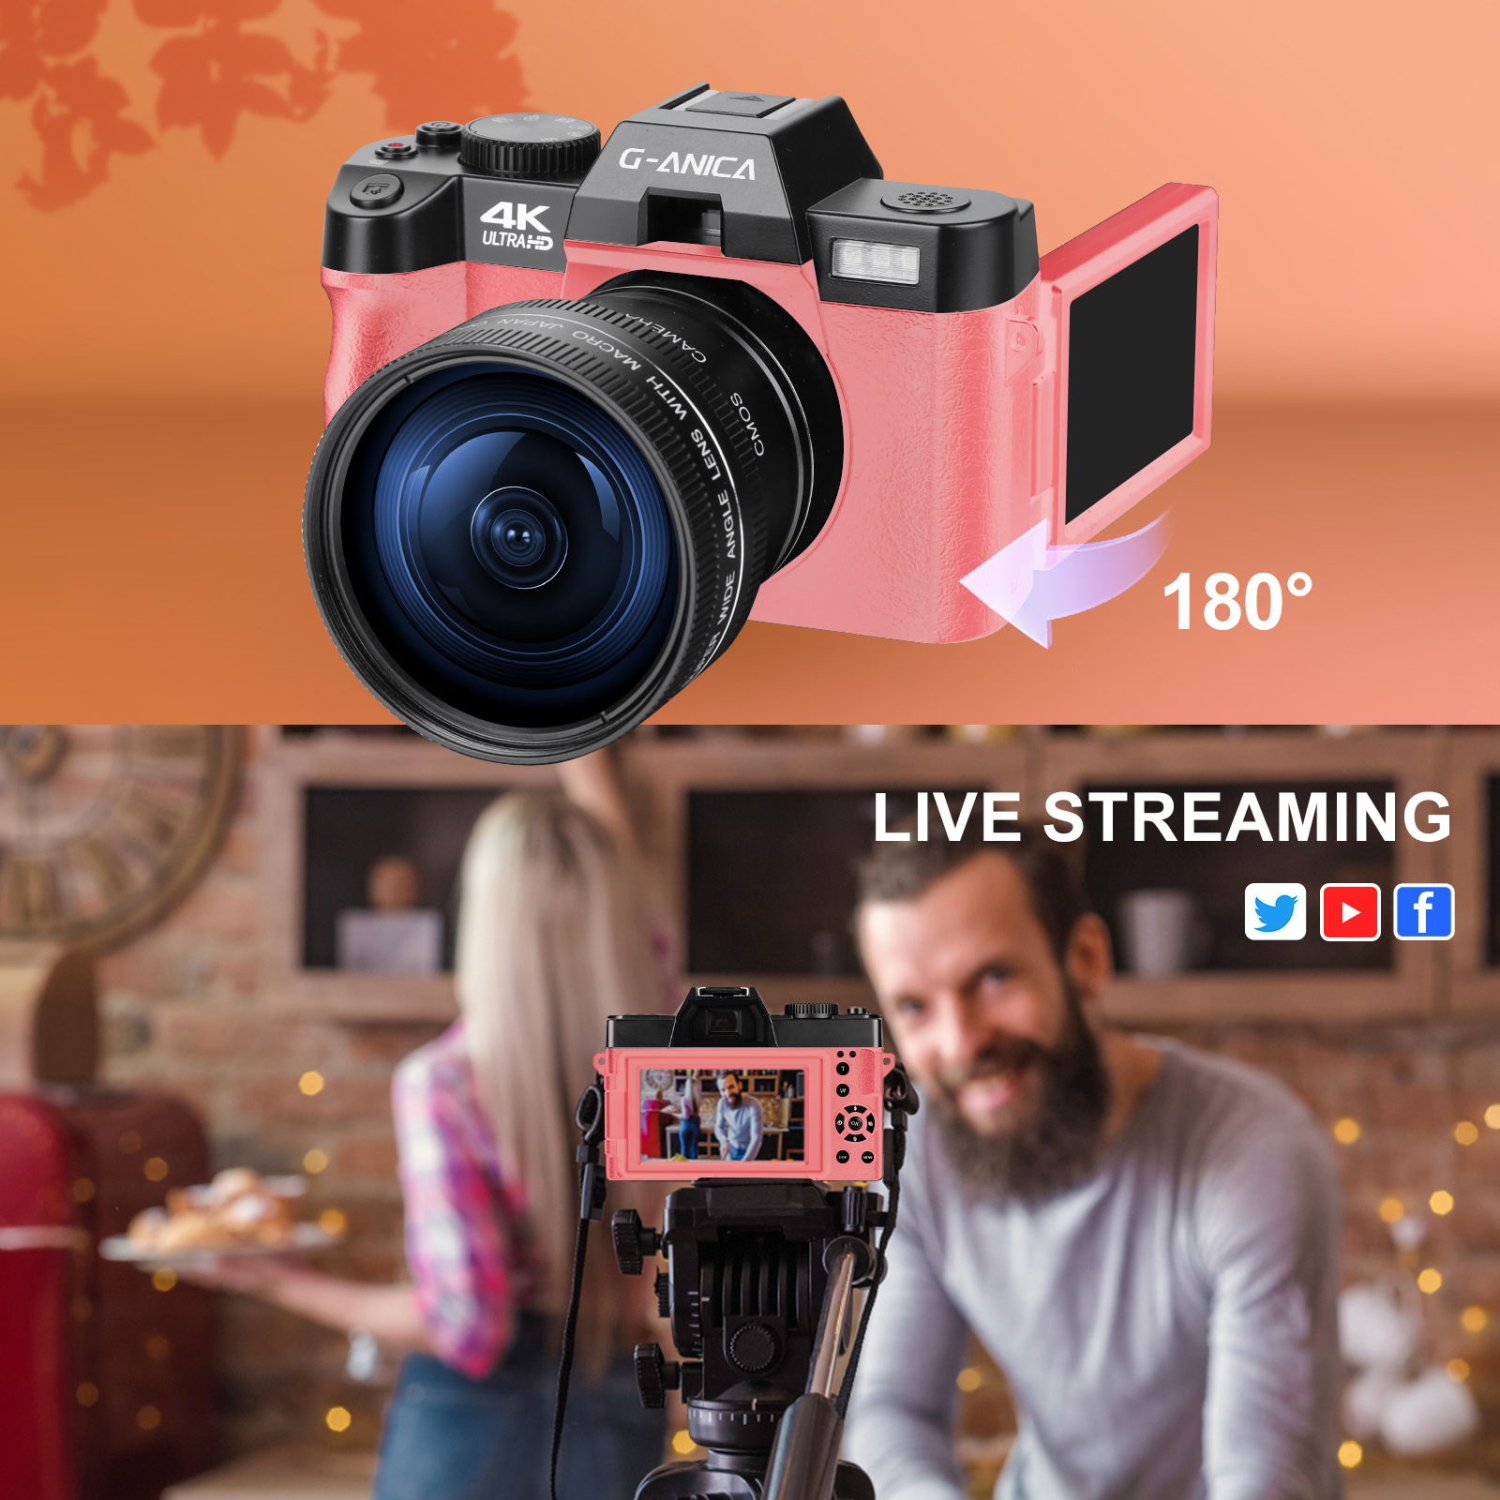 G-Anica 4k Digital Cameras for Photography(Pink), 48 MP Video